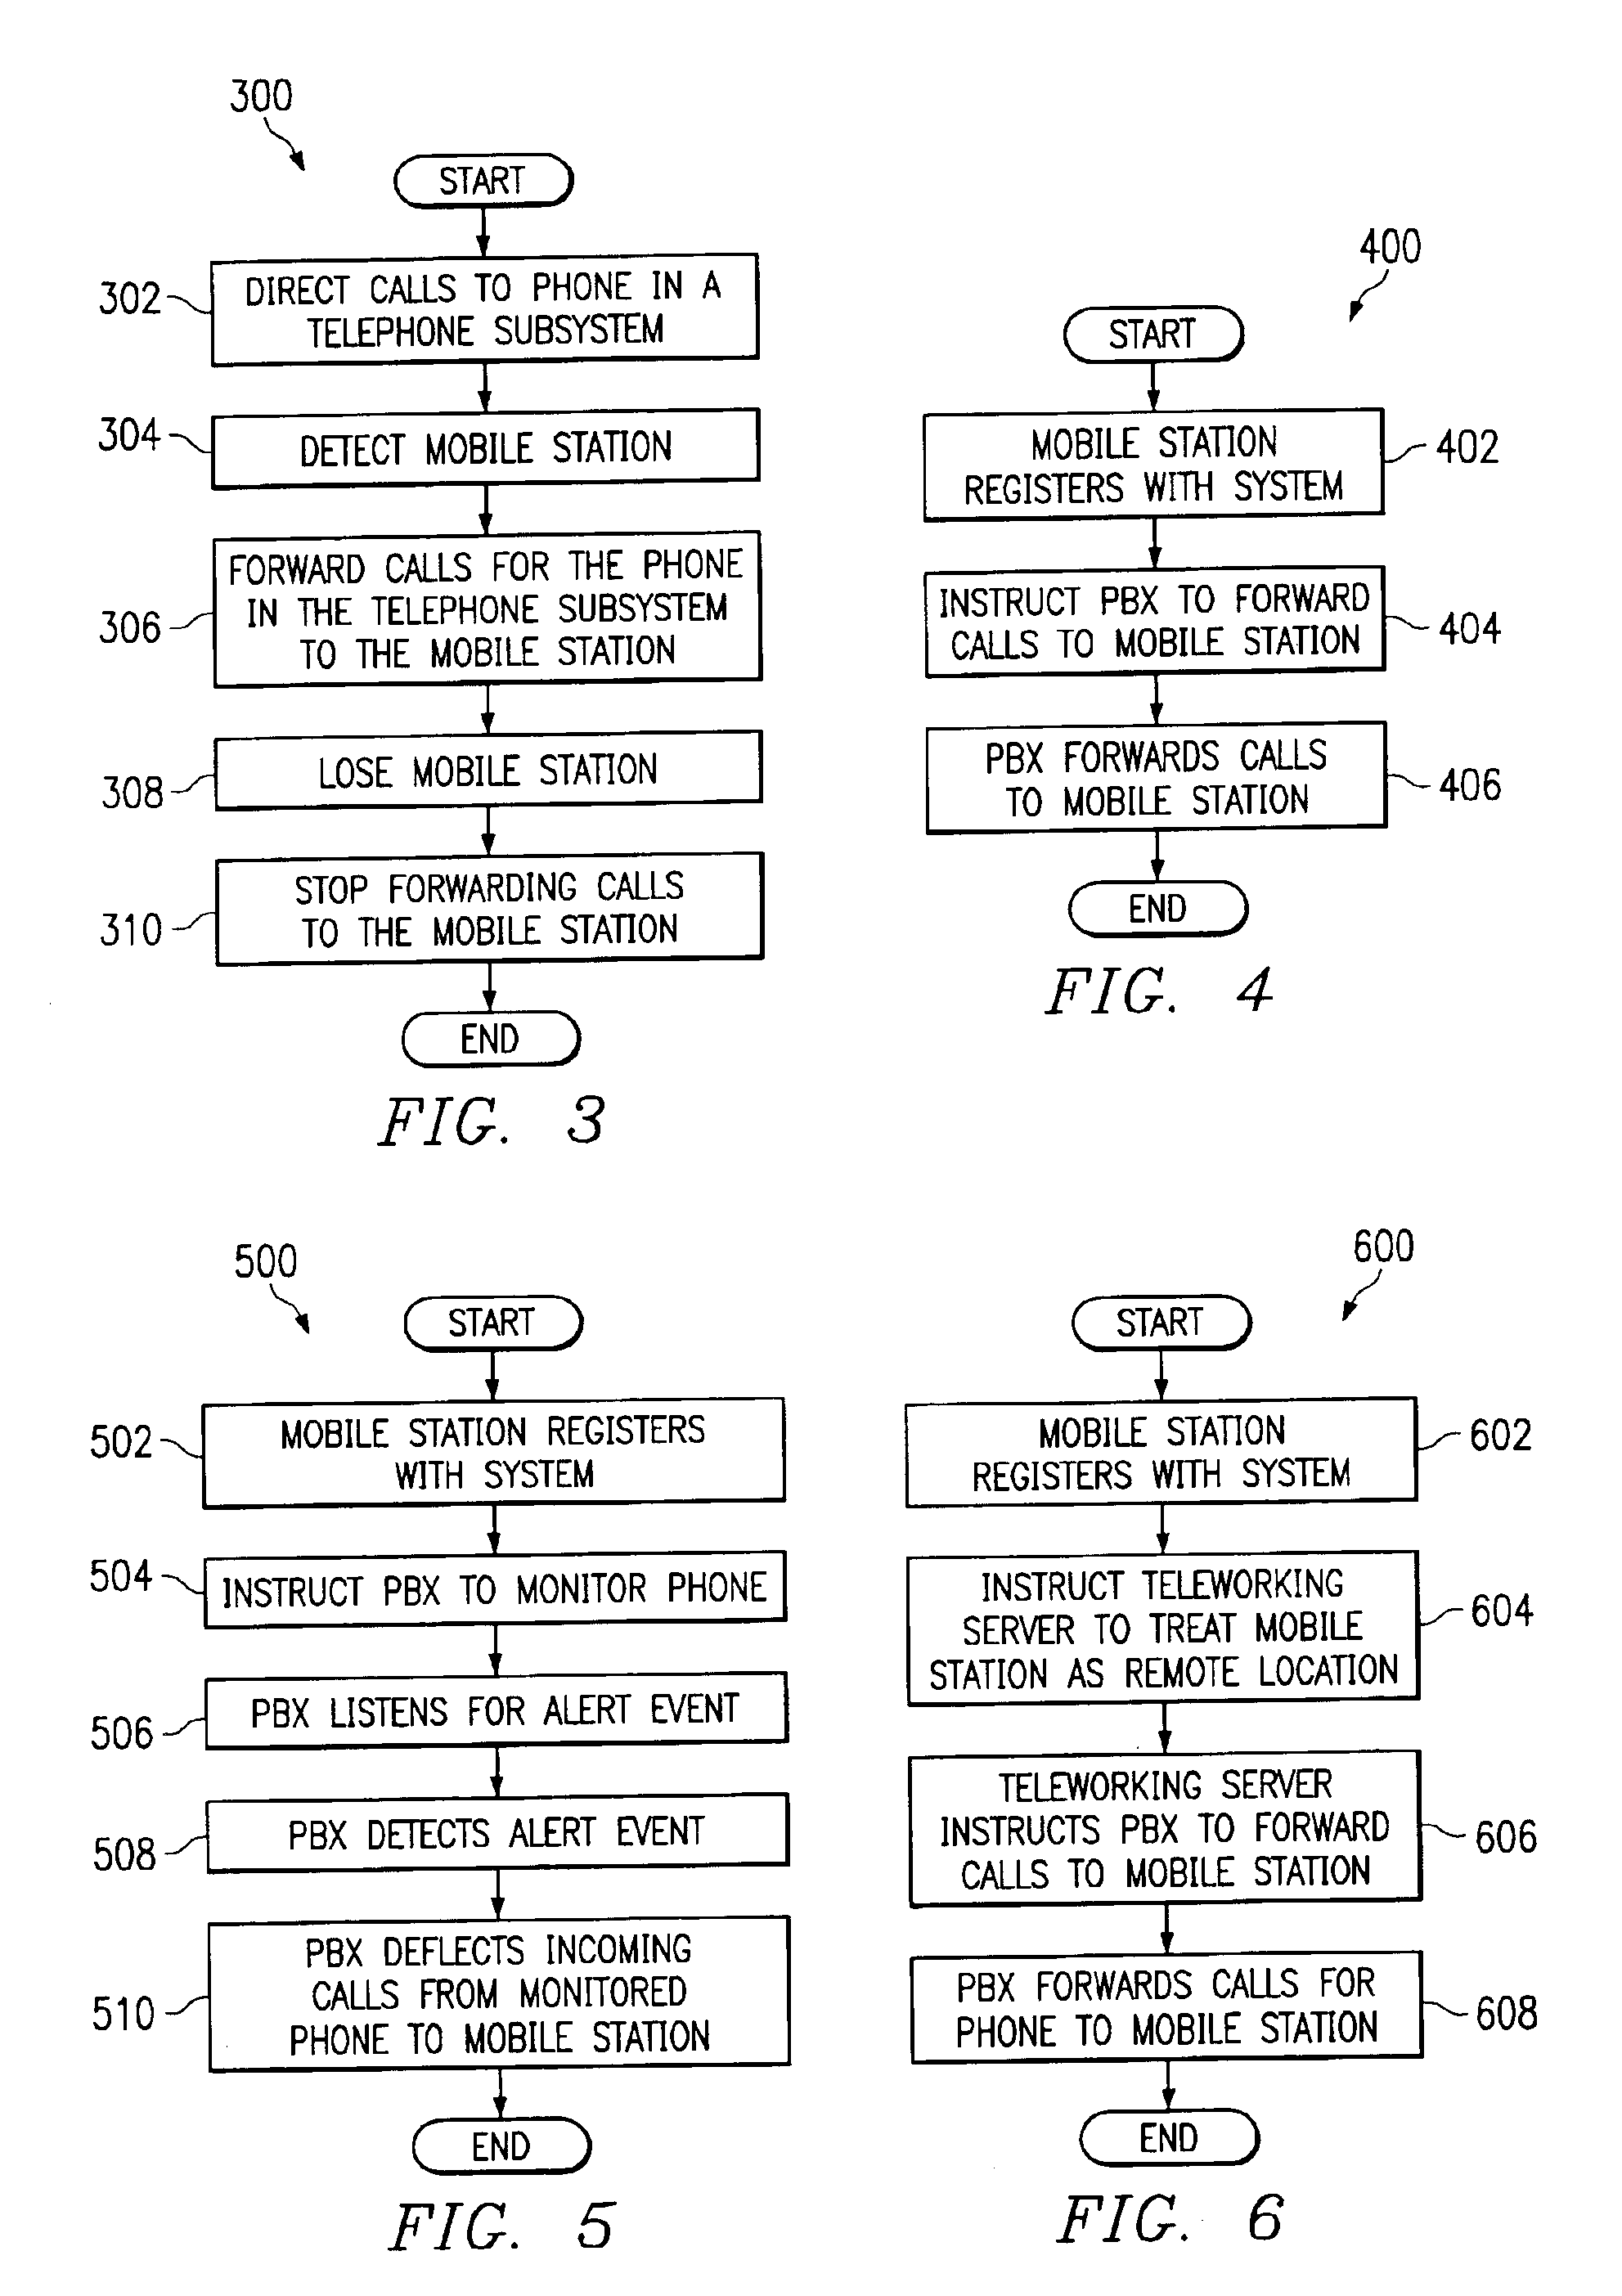 System and method for call forwarding synchronization in a communication system